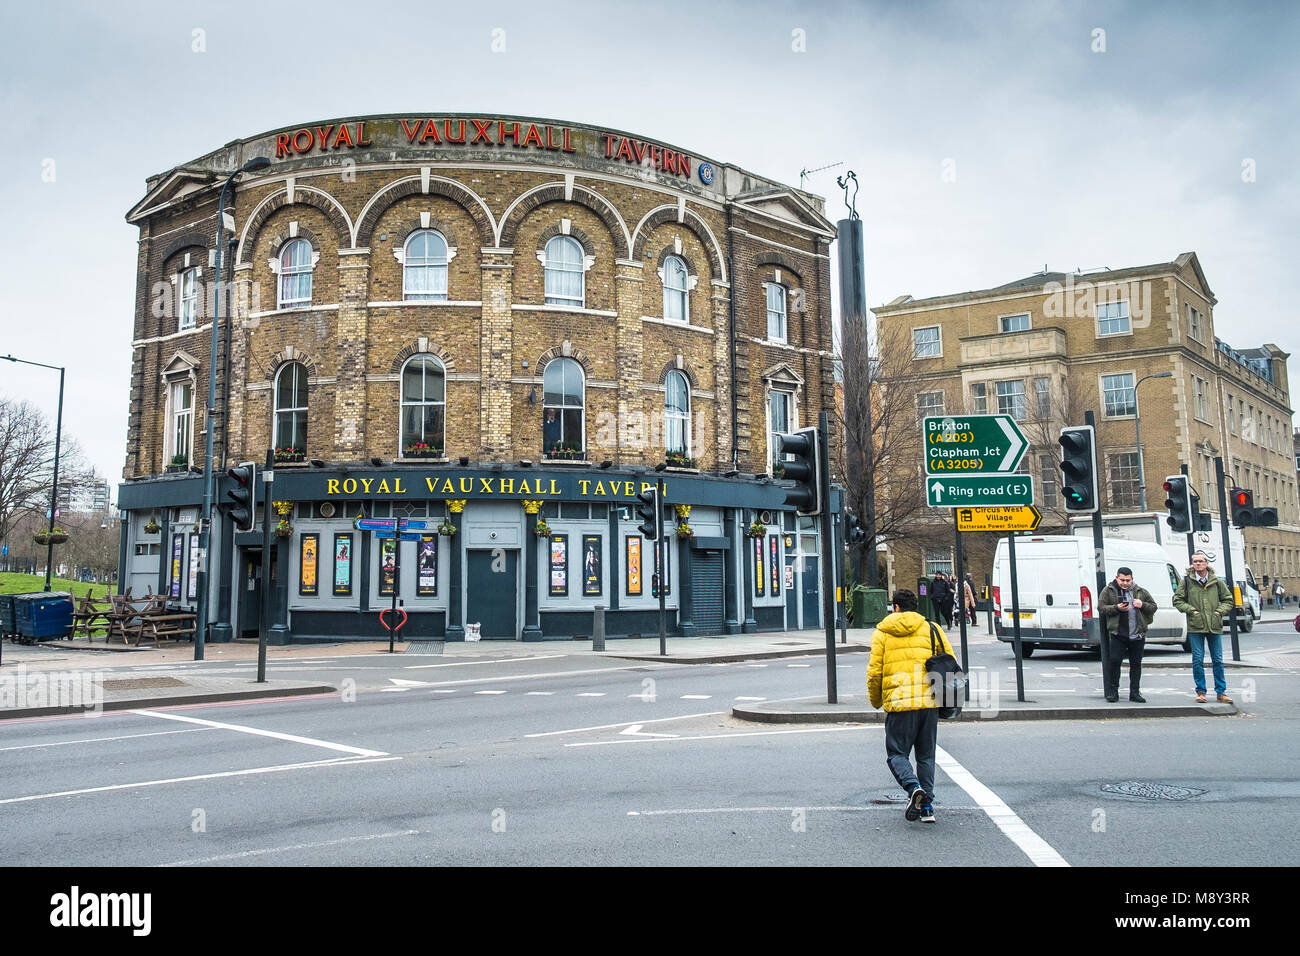 The Royal Vauxhall Tavern in London. Stock Photo